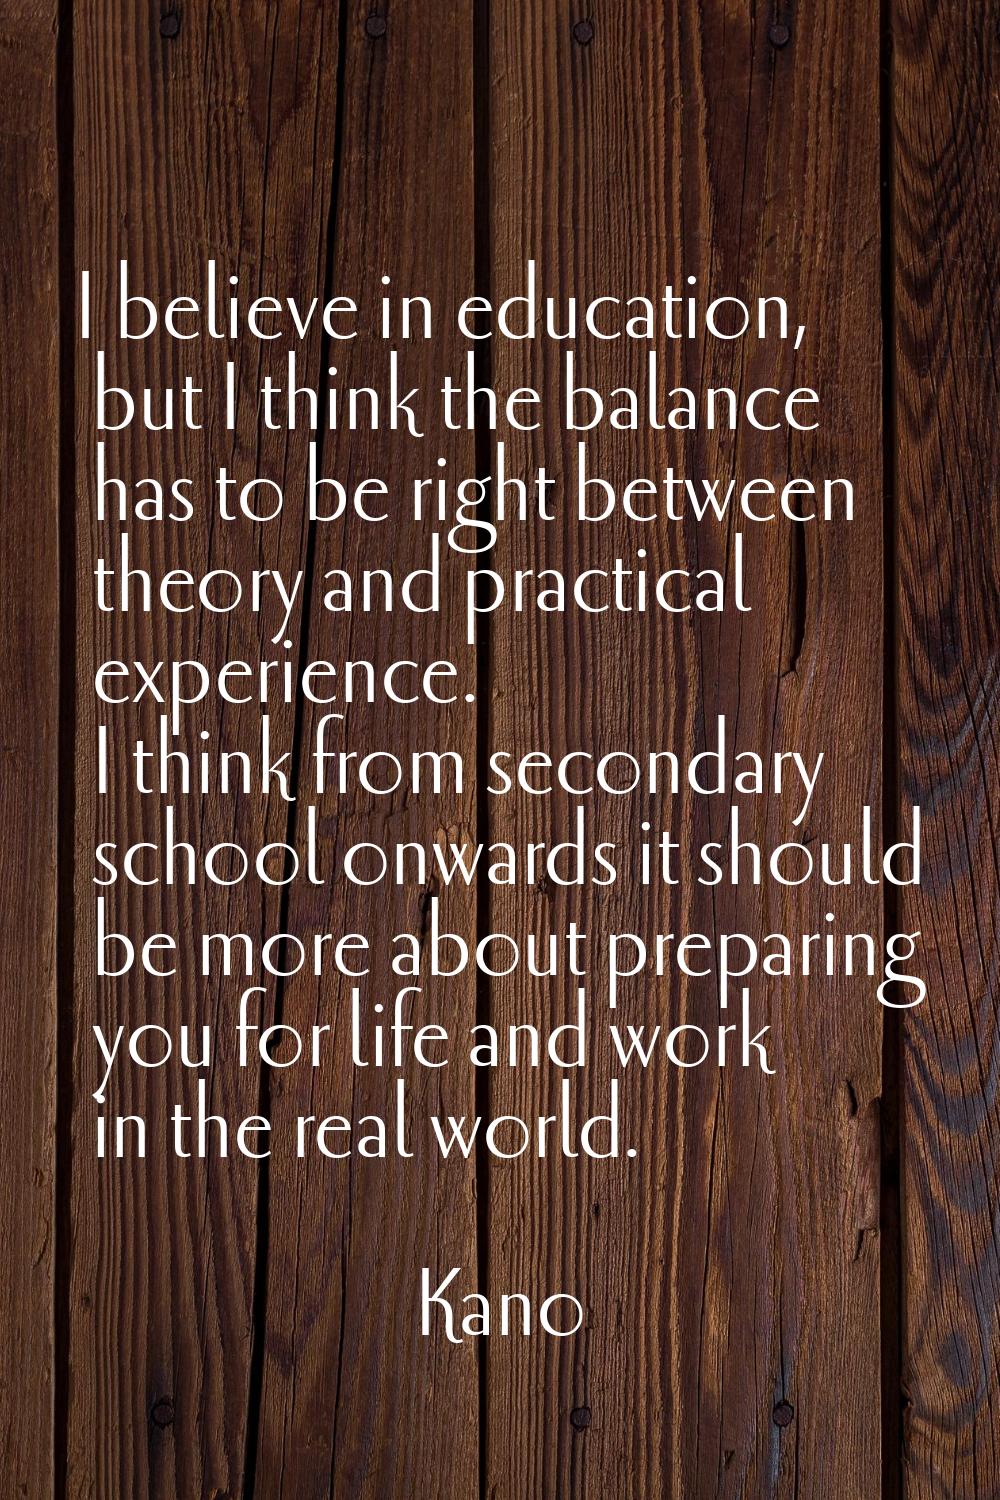 I believe in education, but I think the balance has to be right between theory and practical experi